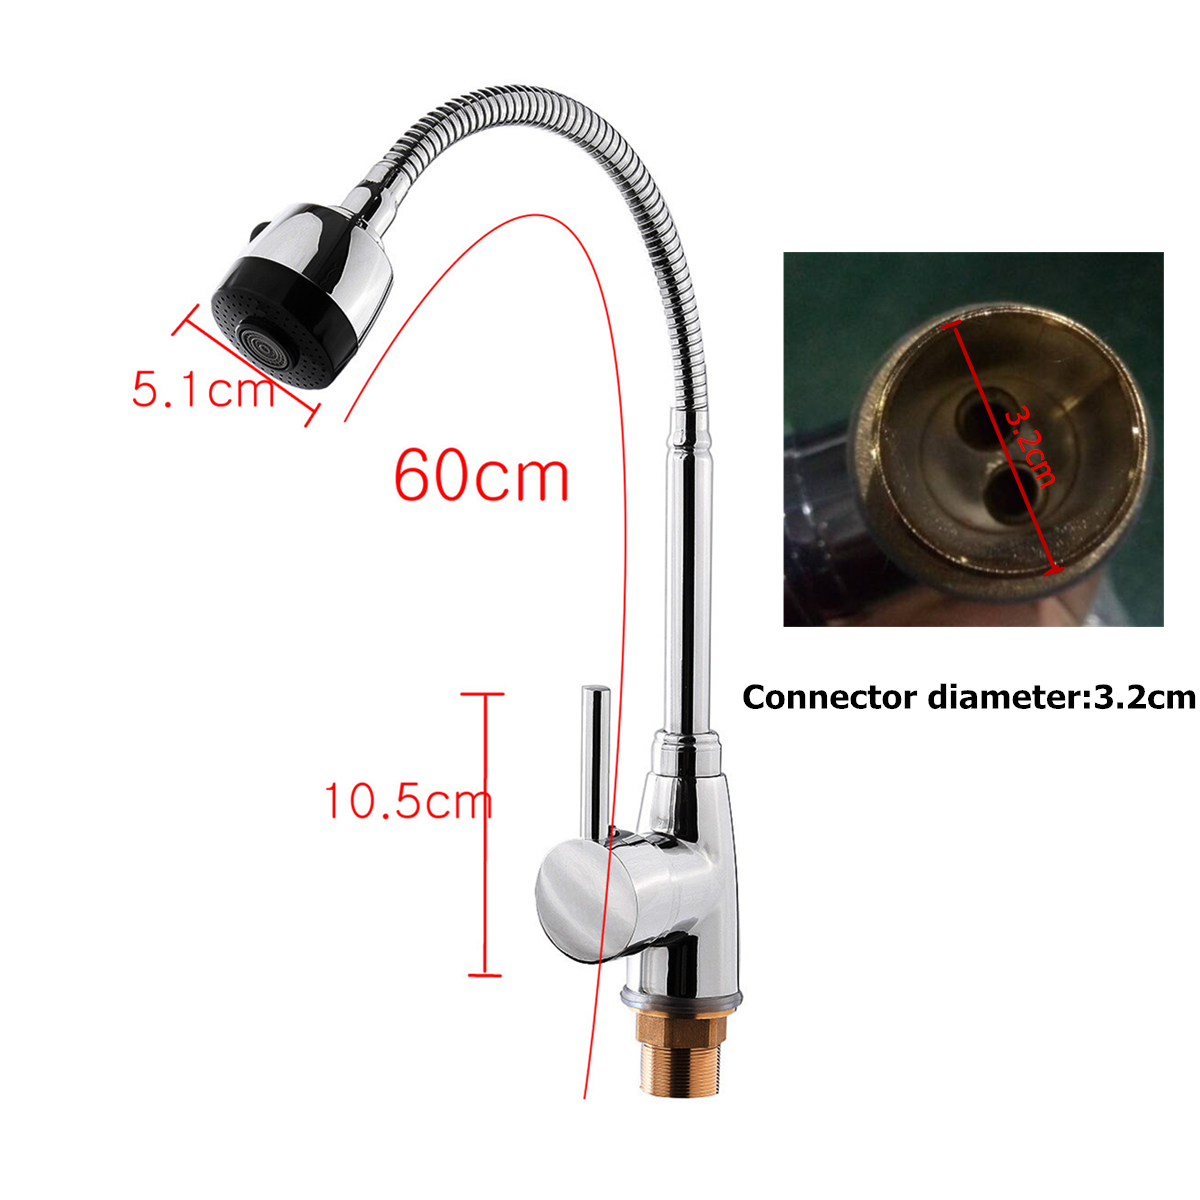 Kitchen-Bathroom-Spout-Faucet-360deg-Rotate-Pull-out-Sprayer-Hot-Cold-Water-Mixer-Tap-1379768